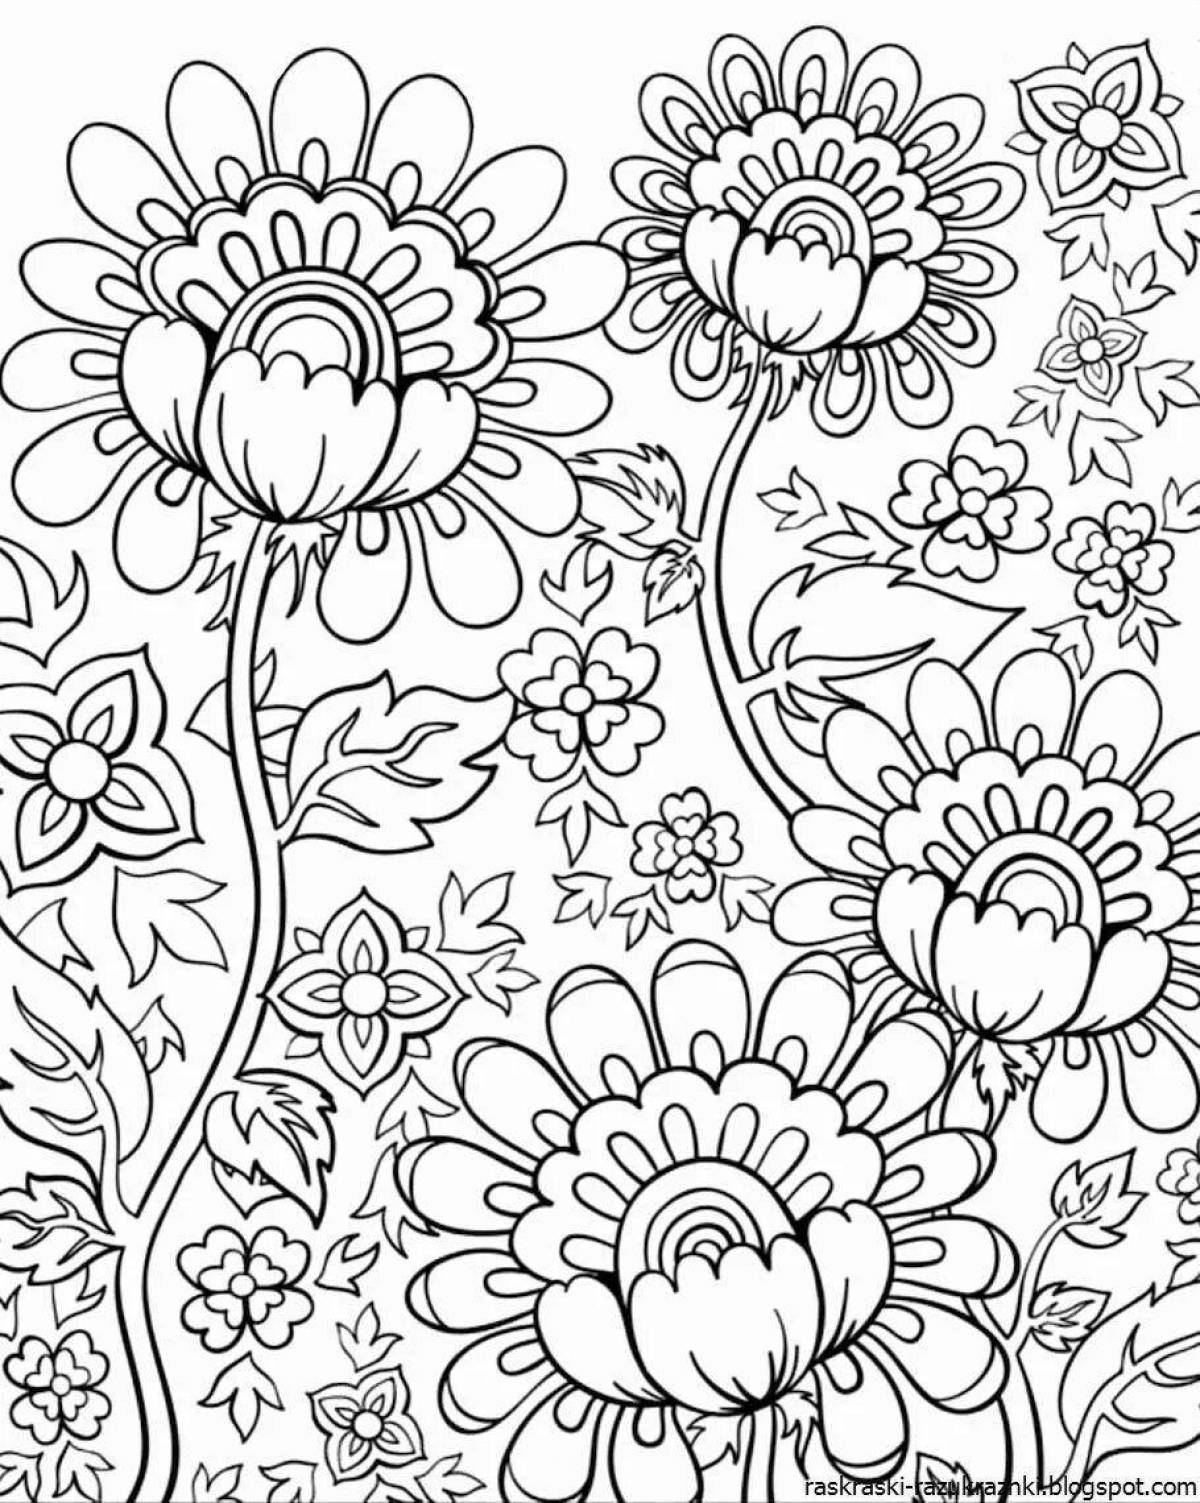 Peaceful coloring templates